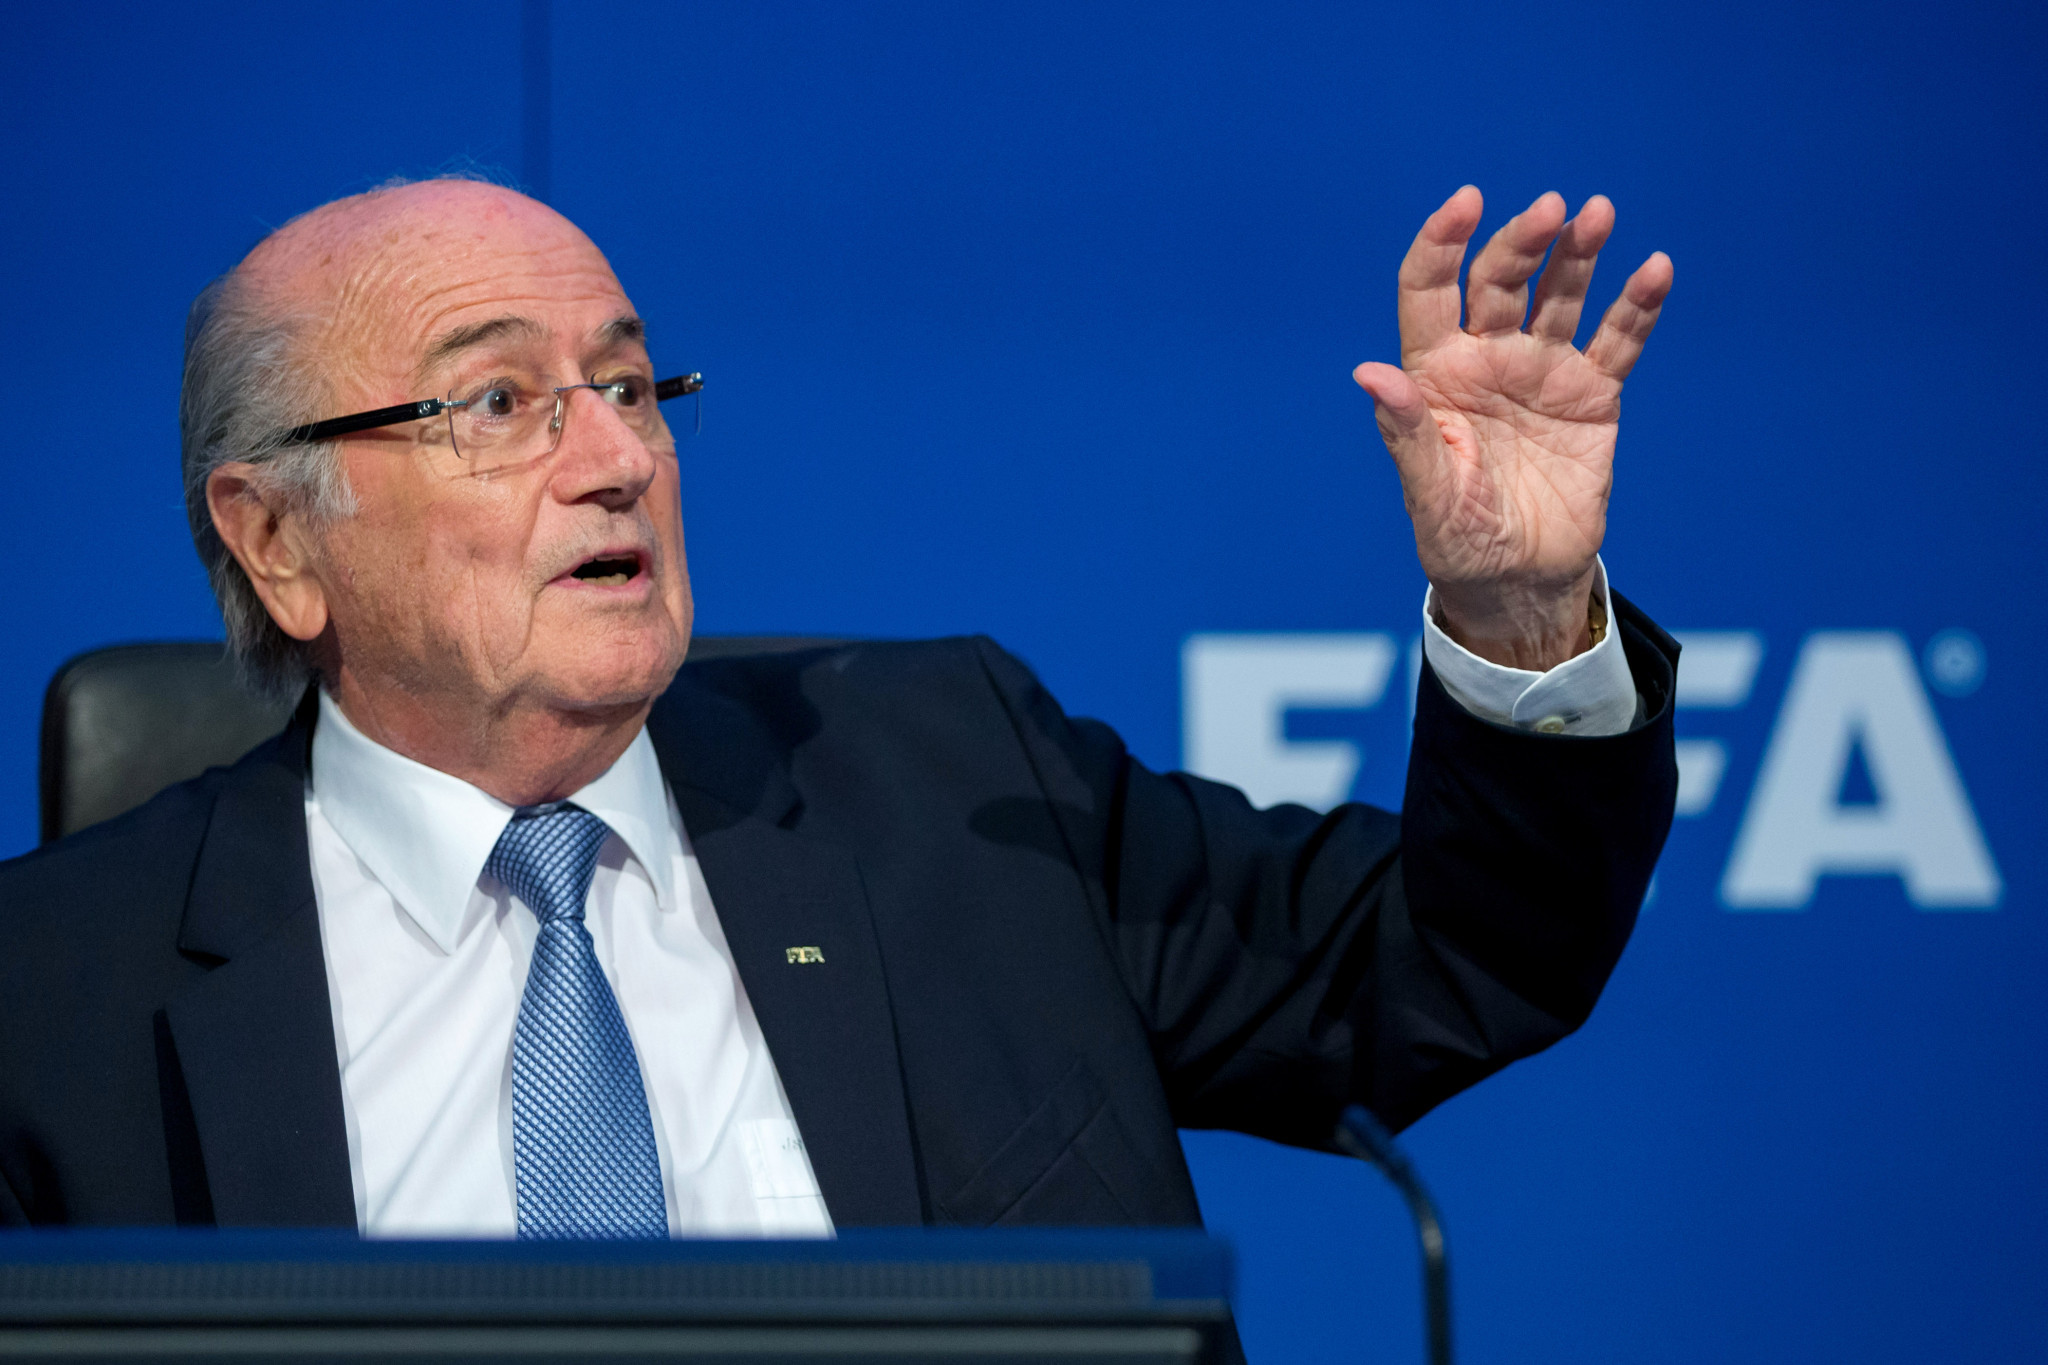 Sepp Blatter held the position of FIFA President for 17 years before corruption scandals ended his career ©Getty Images